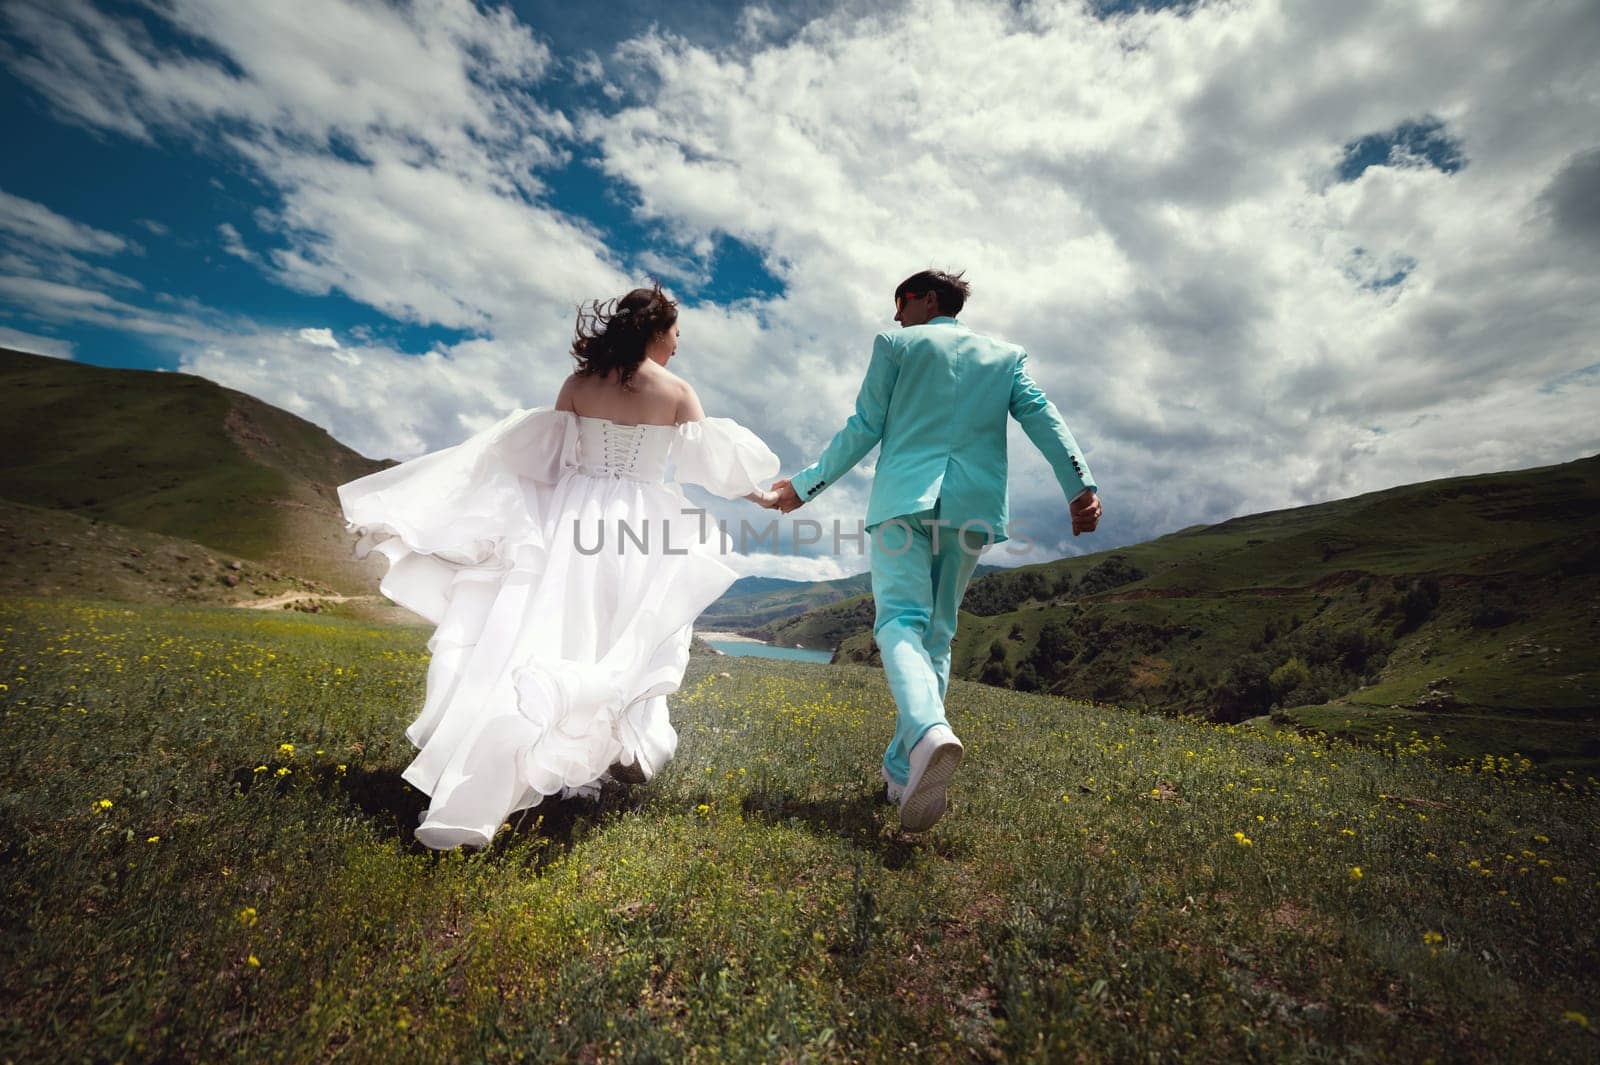 Rear view of running loving newlyweds holding hands, a bride in a wedding dress and a wife in a turquoise suit running across a field against the backdrop of green hills by yanik88